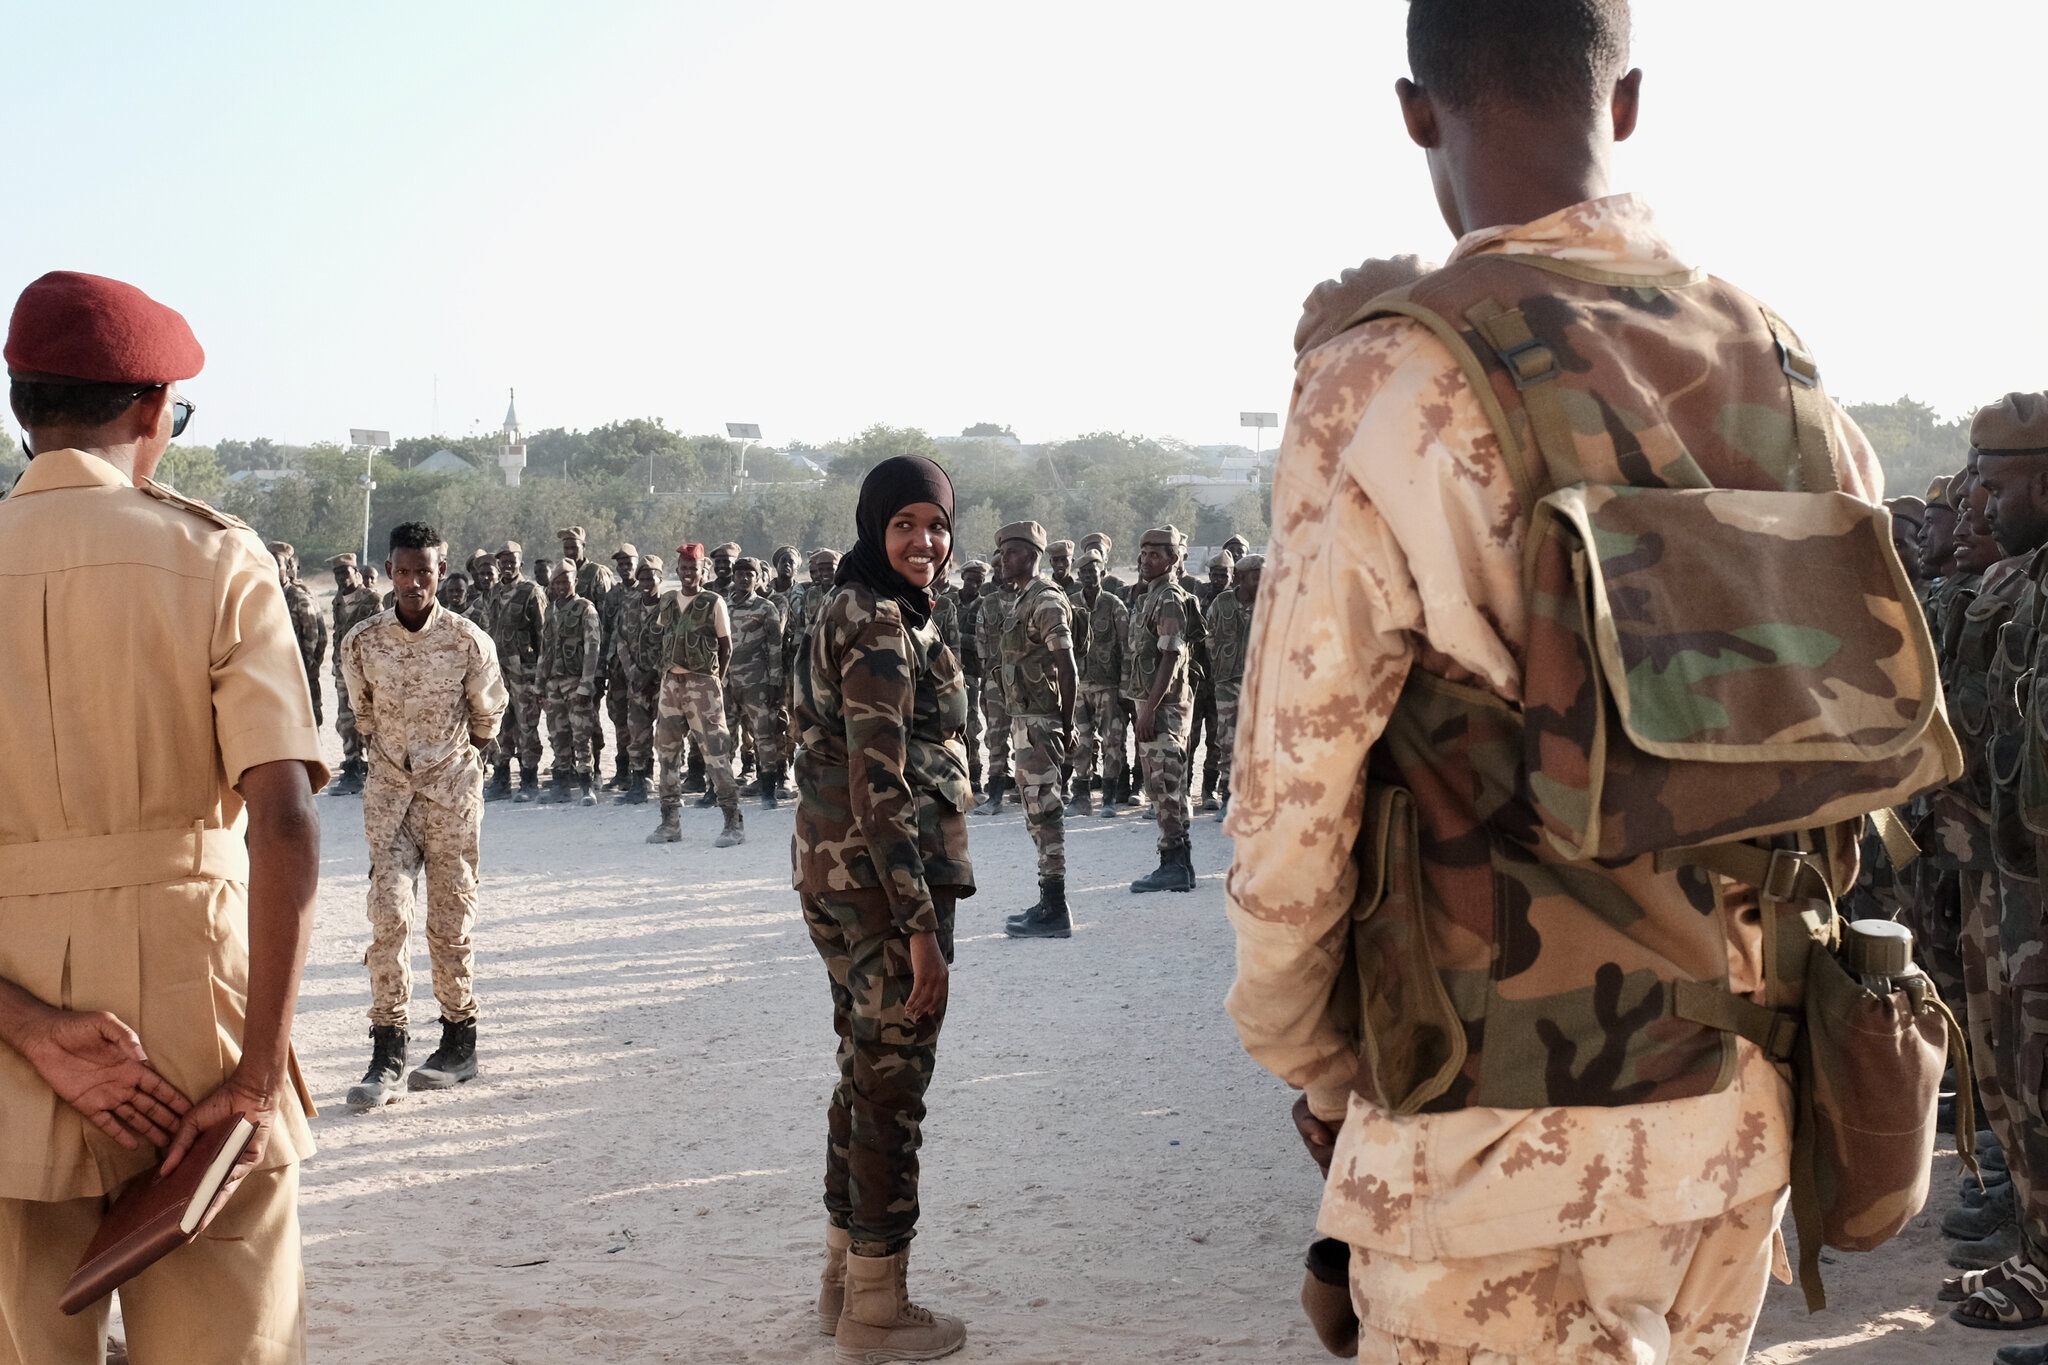 Somalia’s Army Told Her to Sew a Skirt. Now She’s One of Its Top Officers.